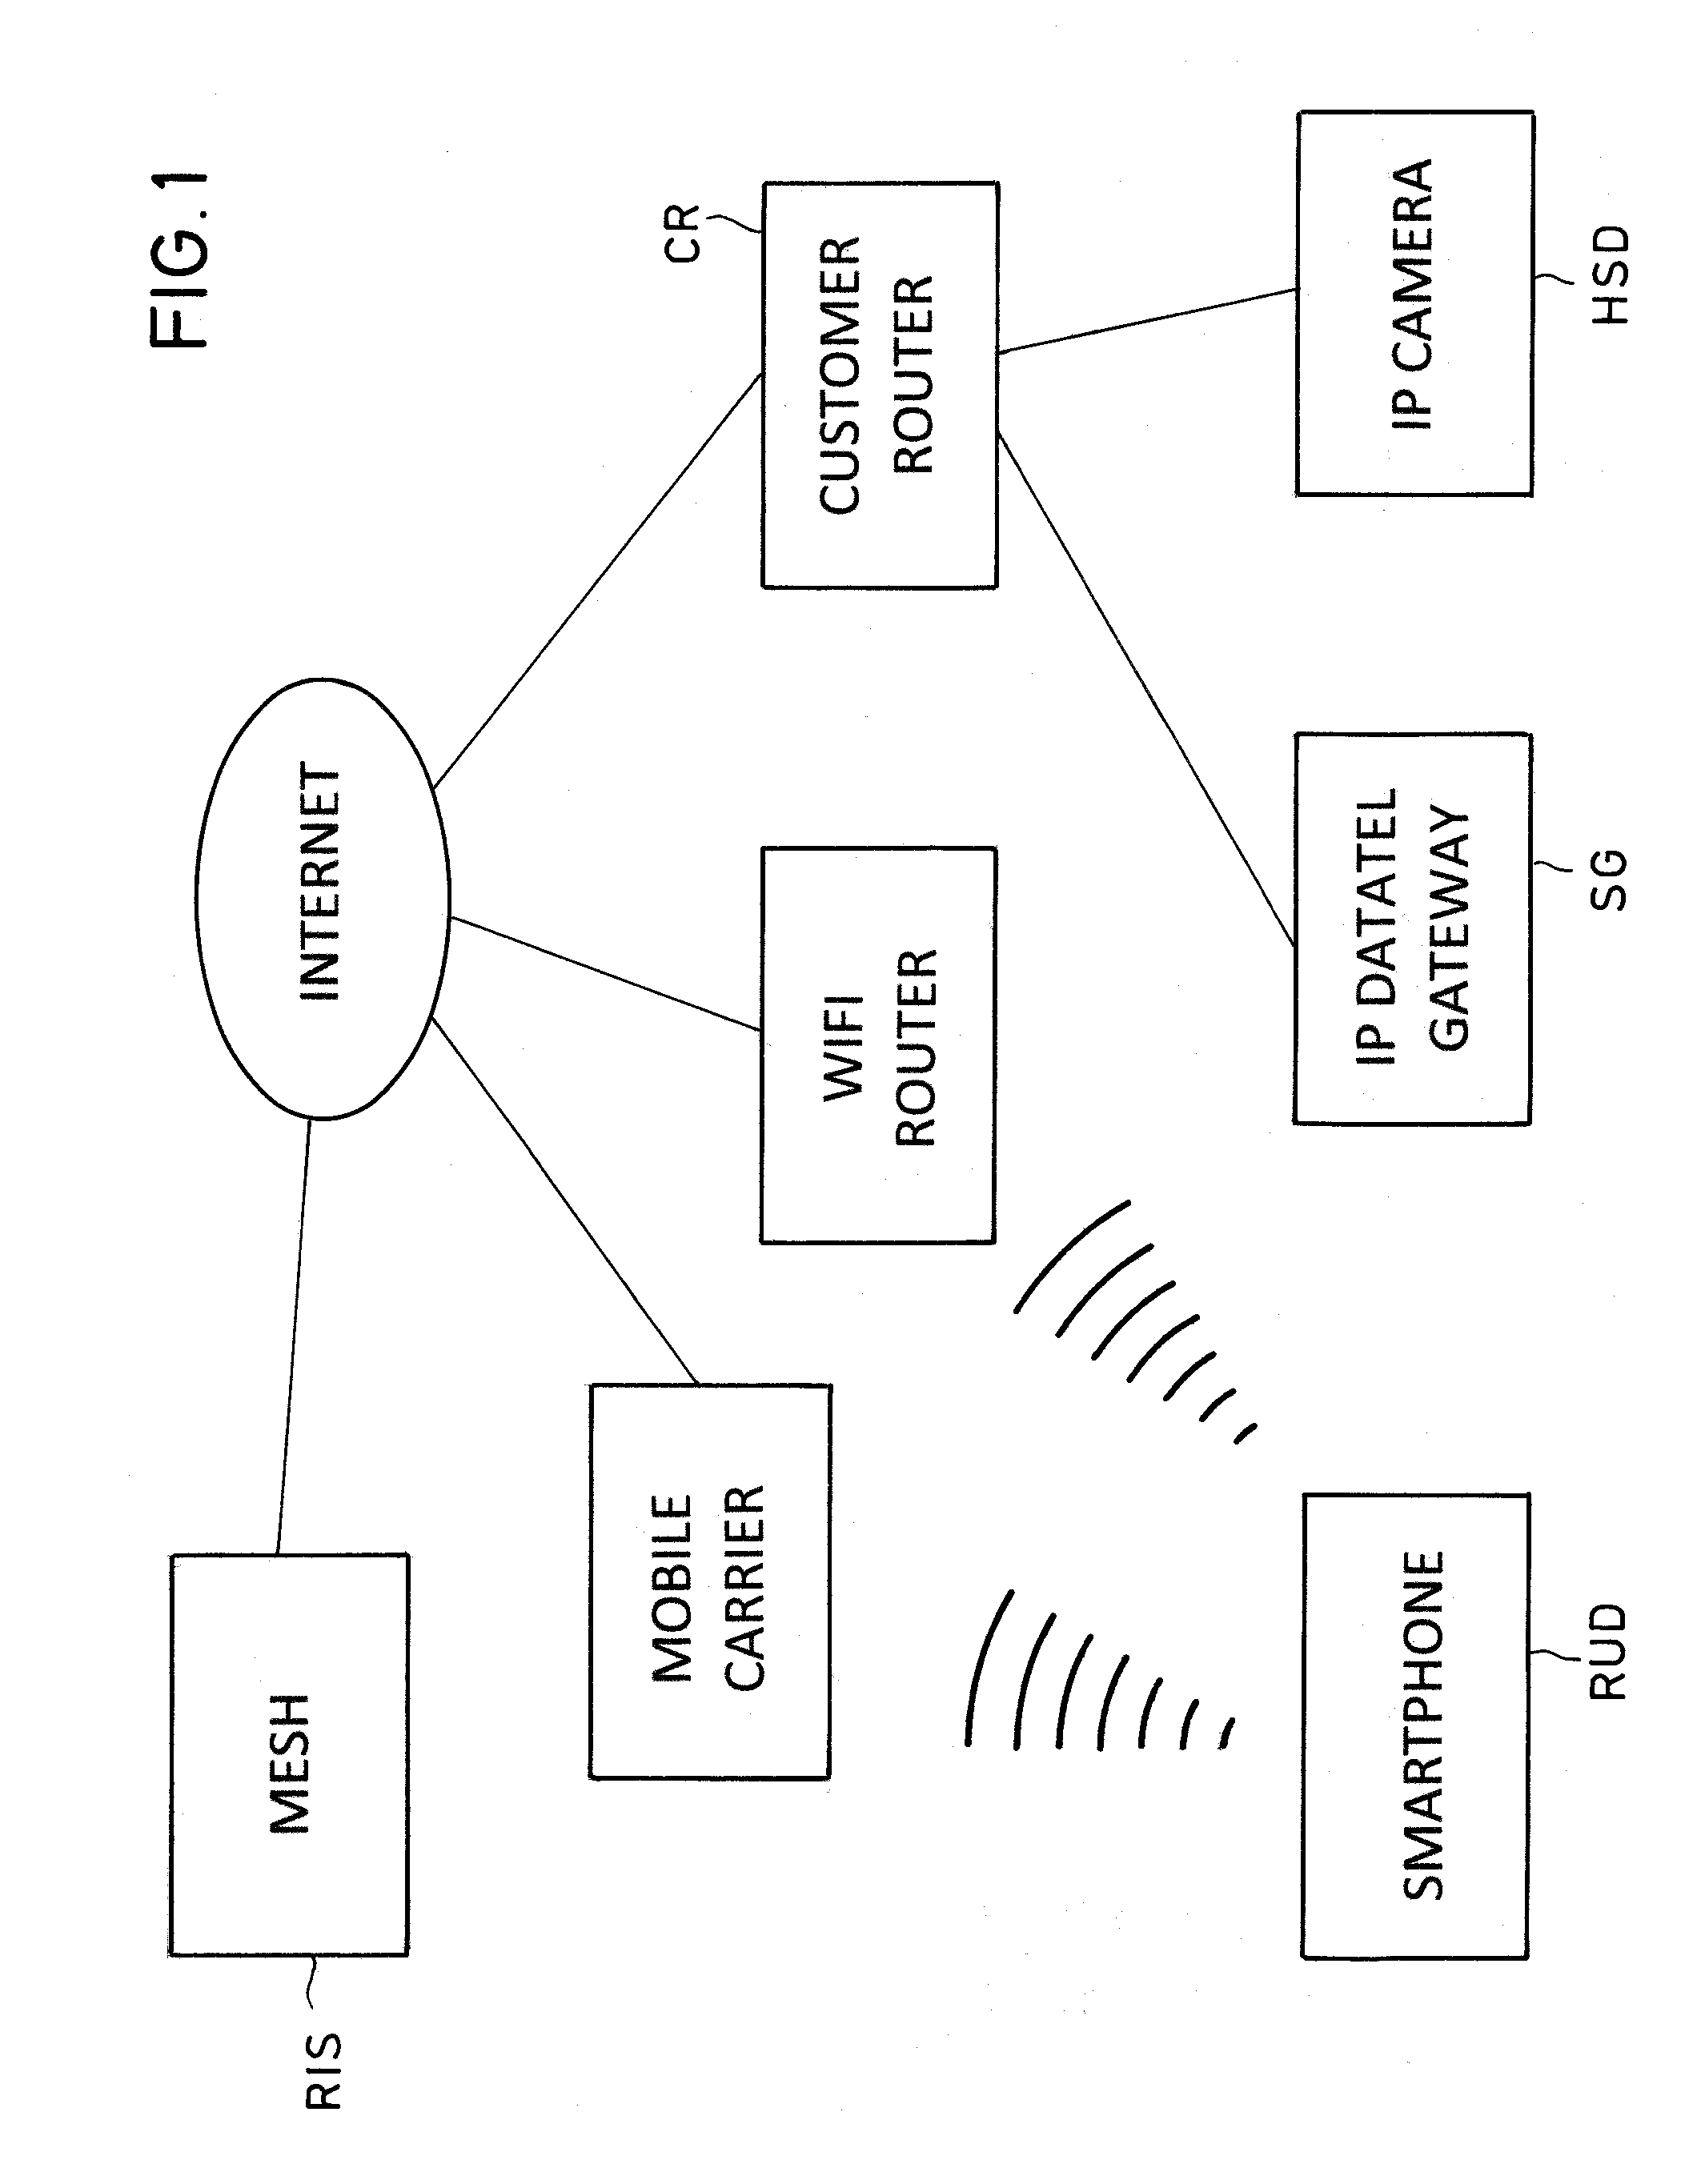 Method and Apparatus for Facilitating Accessing Home Surveillance Data by Remote Devices